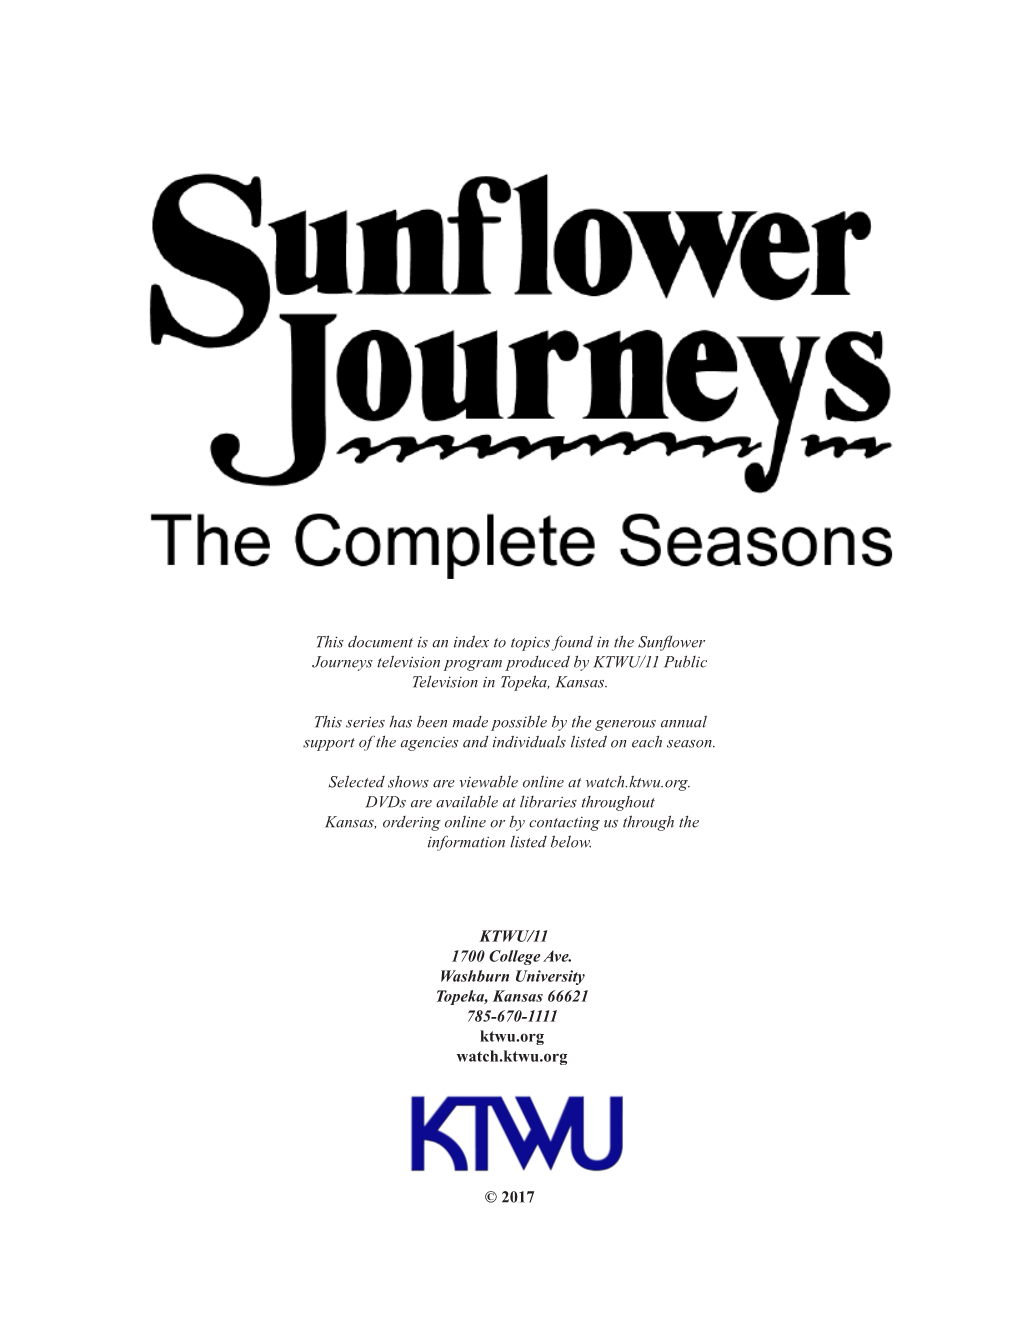 This Document Is an Index to Topics Found in the Sunflower Journeys Television Program Produced by KTWU/11 Public Television in Topeka, Kansas